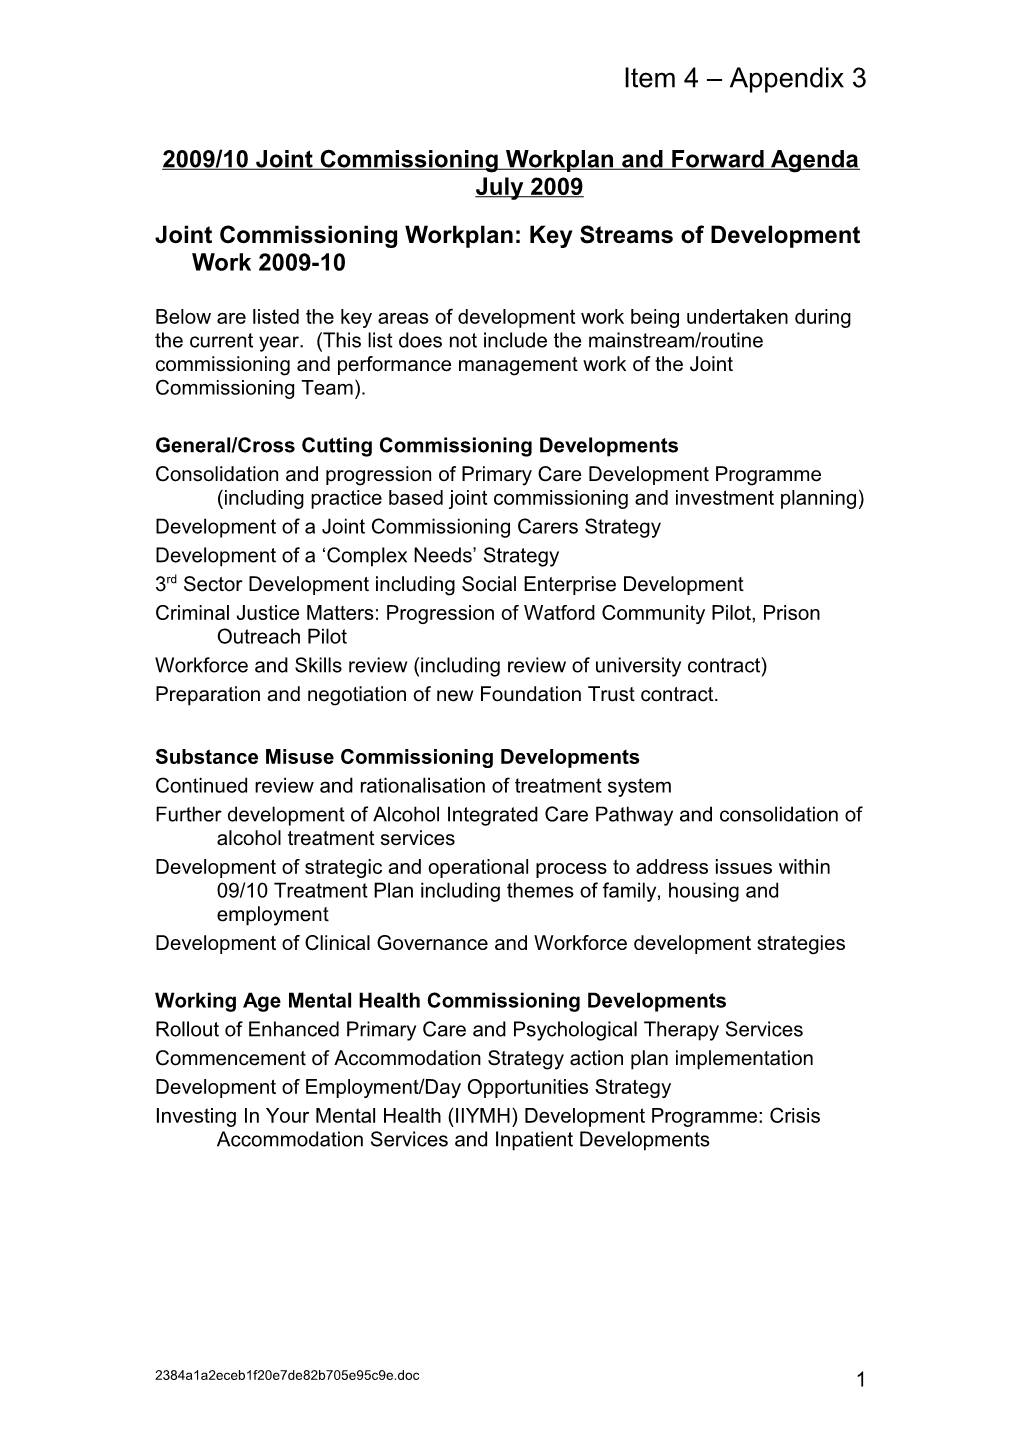 2009/10 Joint Commissioning Workplan and Forward Agenda May 2009